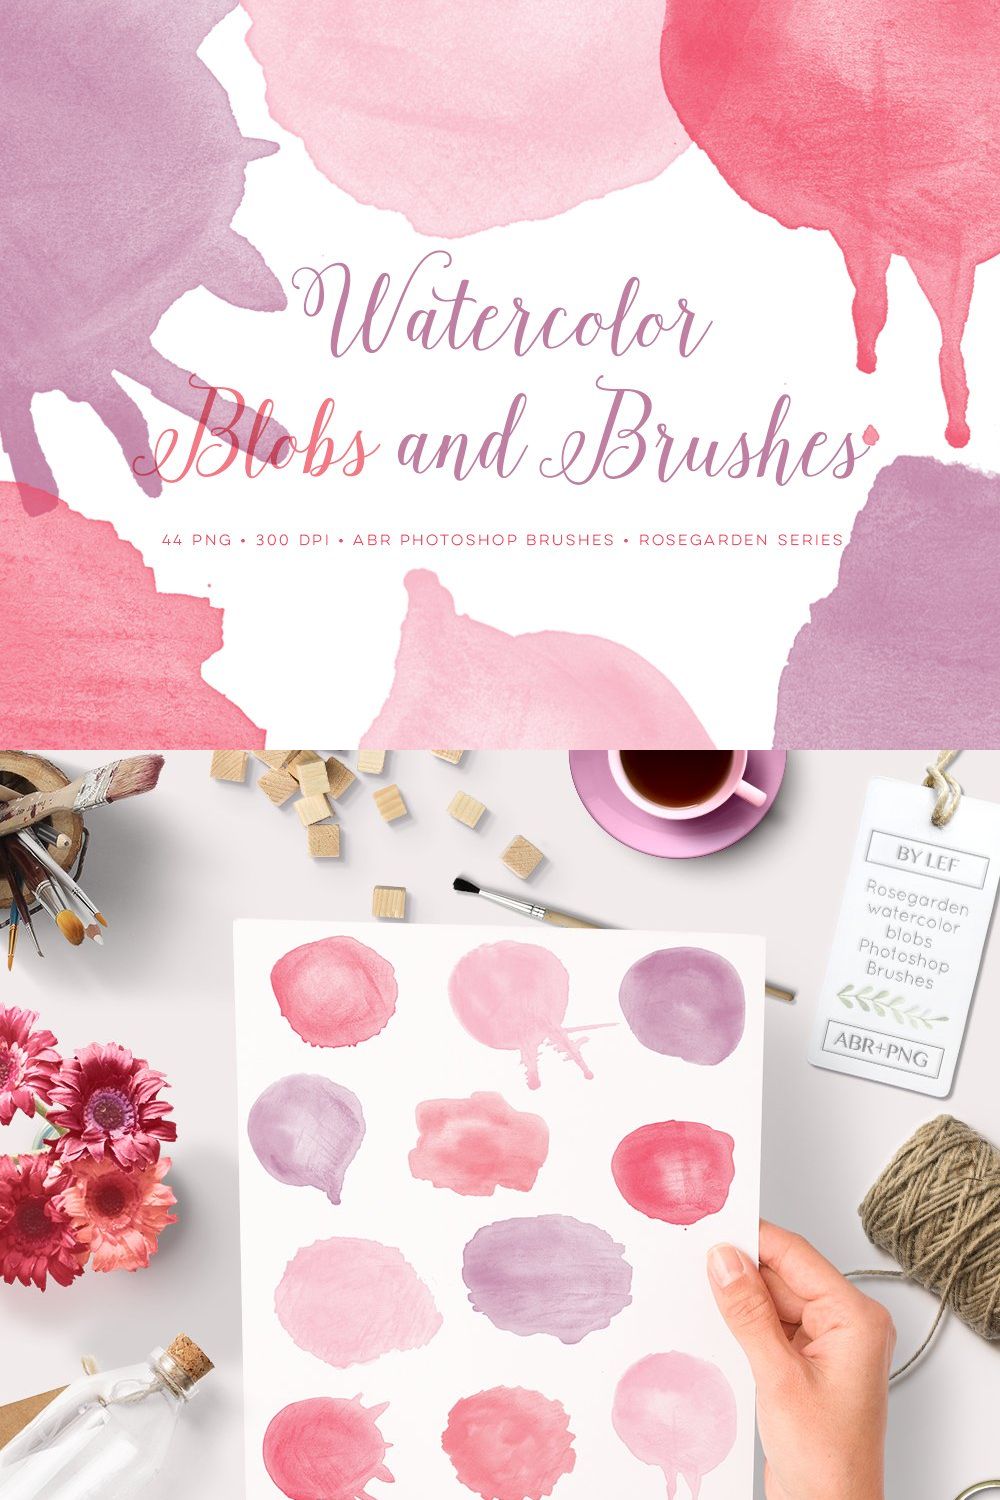 Watercolor Brushes Blobs & Splatters pinterest preview image.